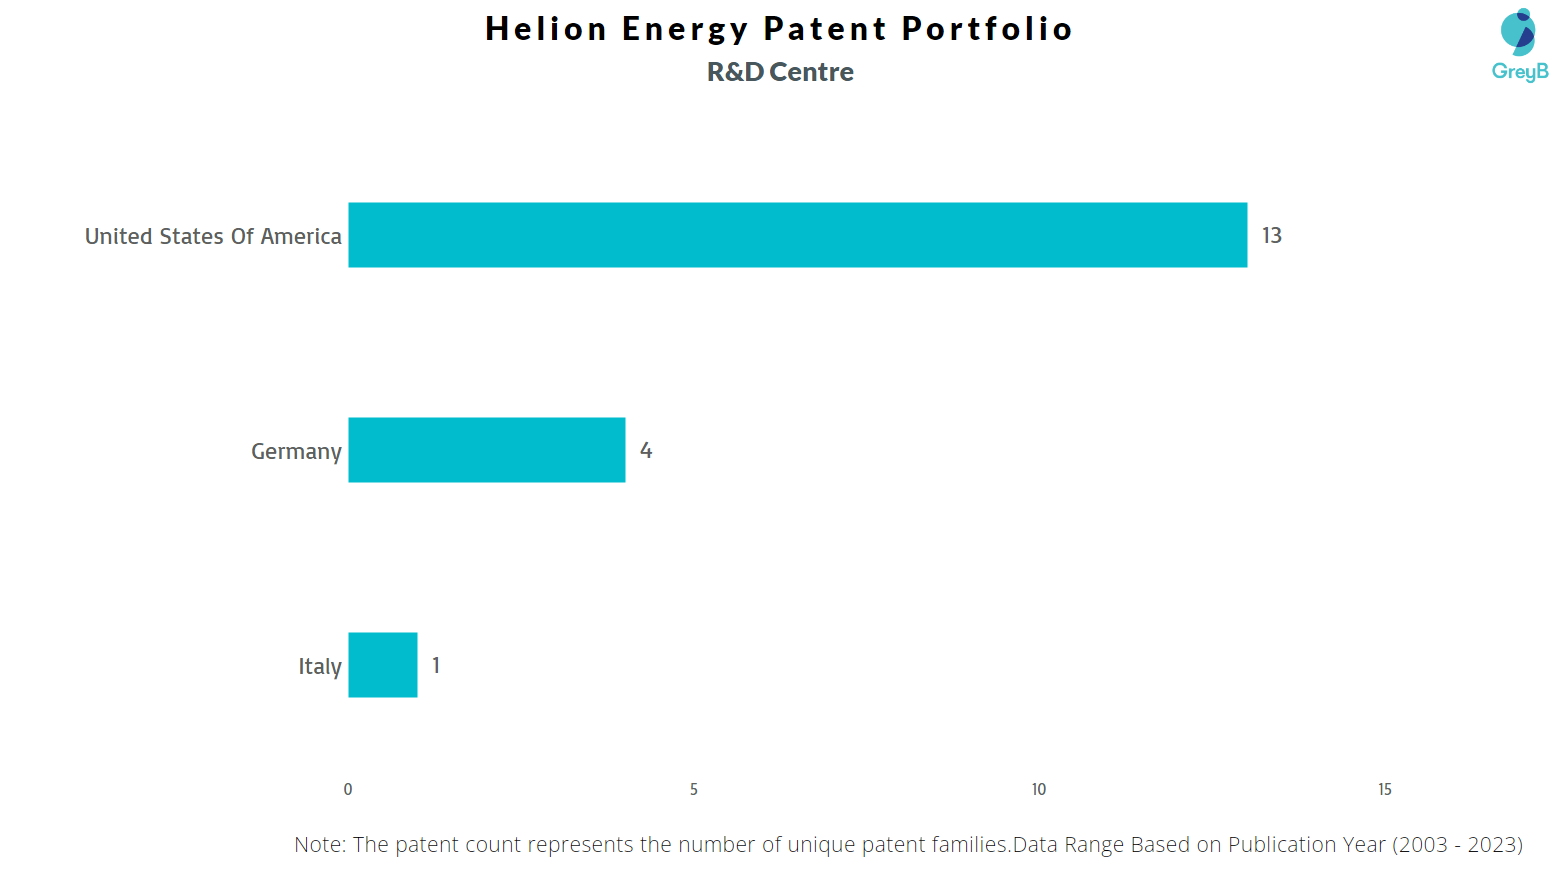 R&D Centres of Helion Energy